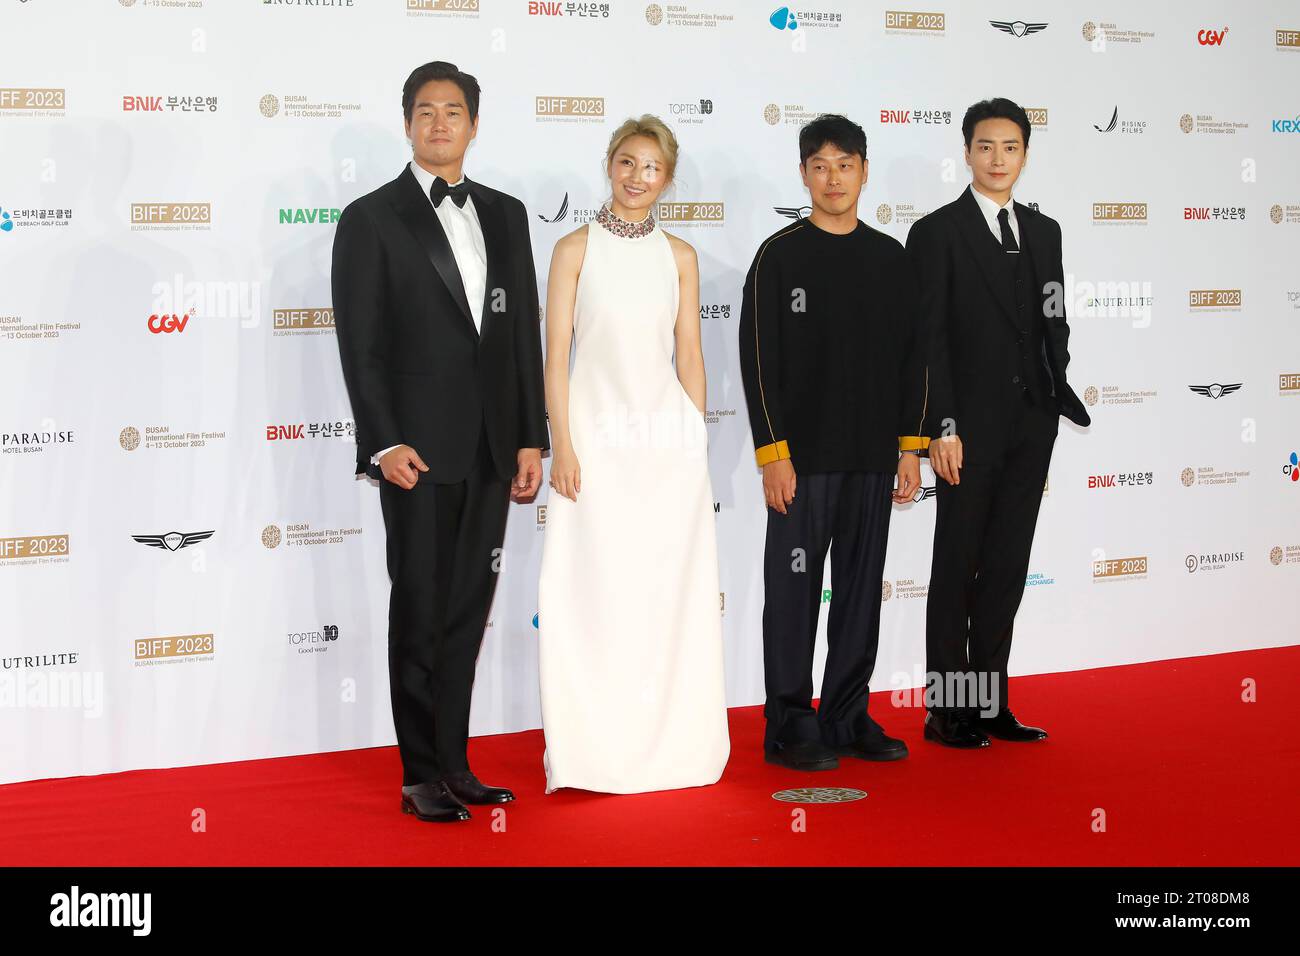 Busan, South Korea. 04th Oct, 2023. Oct 4, 2023-Busan, South Korea-From Left Actor Yu Ji Tae, Actress Kim So Jin, Director Choi Jung Yeol, Actor Lee Jun Hyeok pose for photocall during the 28th Busan International Film Festival Red Carpet Event at Busan Cinema Center in Busan, South Korea (Photo by Seung-il Ryu/NurPhoto) Credit: NurPhoto SRL/Alamy Live News Stock Photo